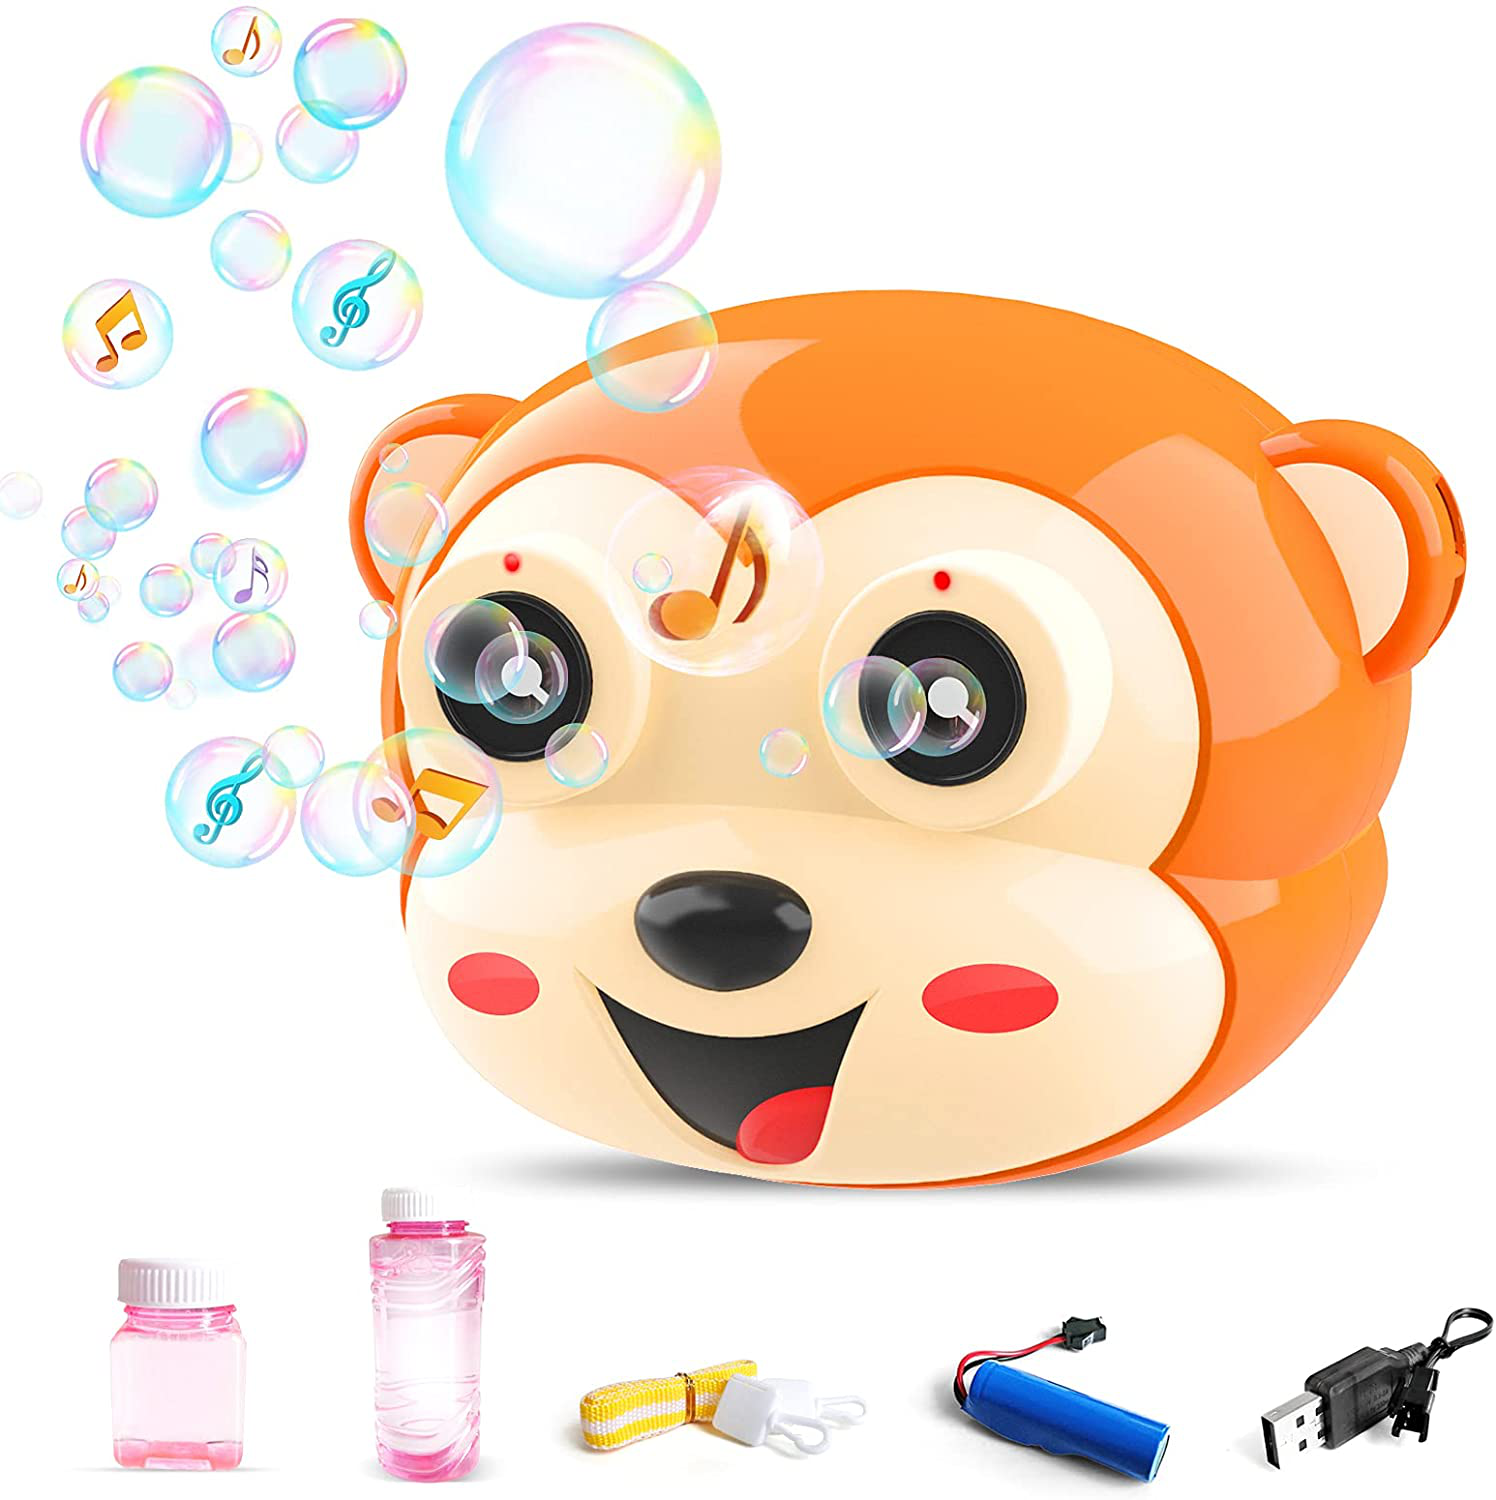 Kimiangel Rechargeable Bubble Machine for Kids, Monkey Automatic Bubble Camera Blower Toy with Light and Music for Parties, Weddings, Outdoor, 800+ Bubbles Per Minute Bubble Maker with Bubble Solution